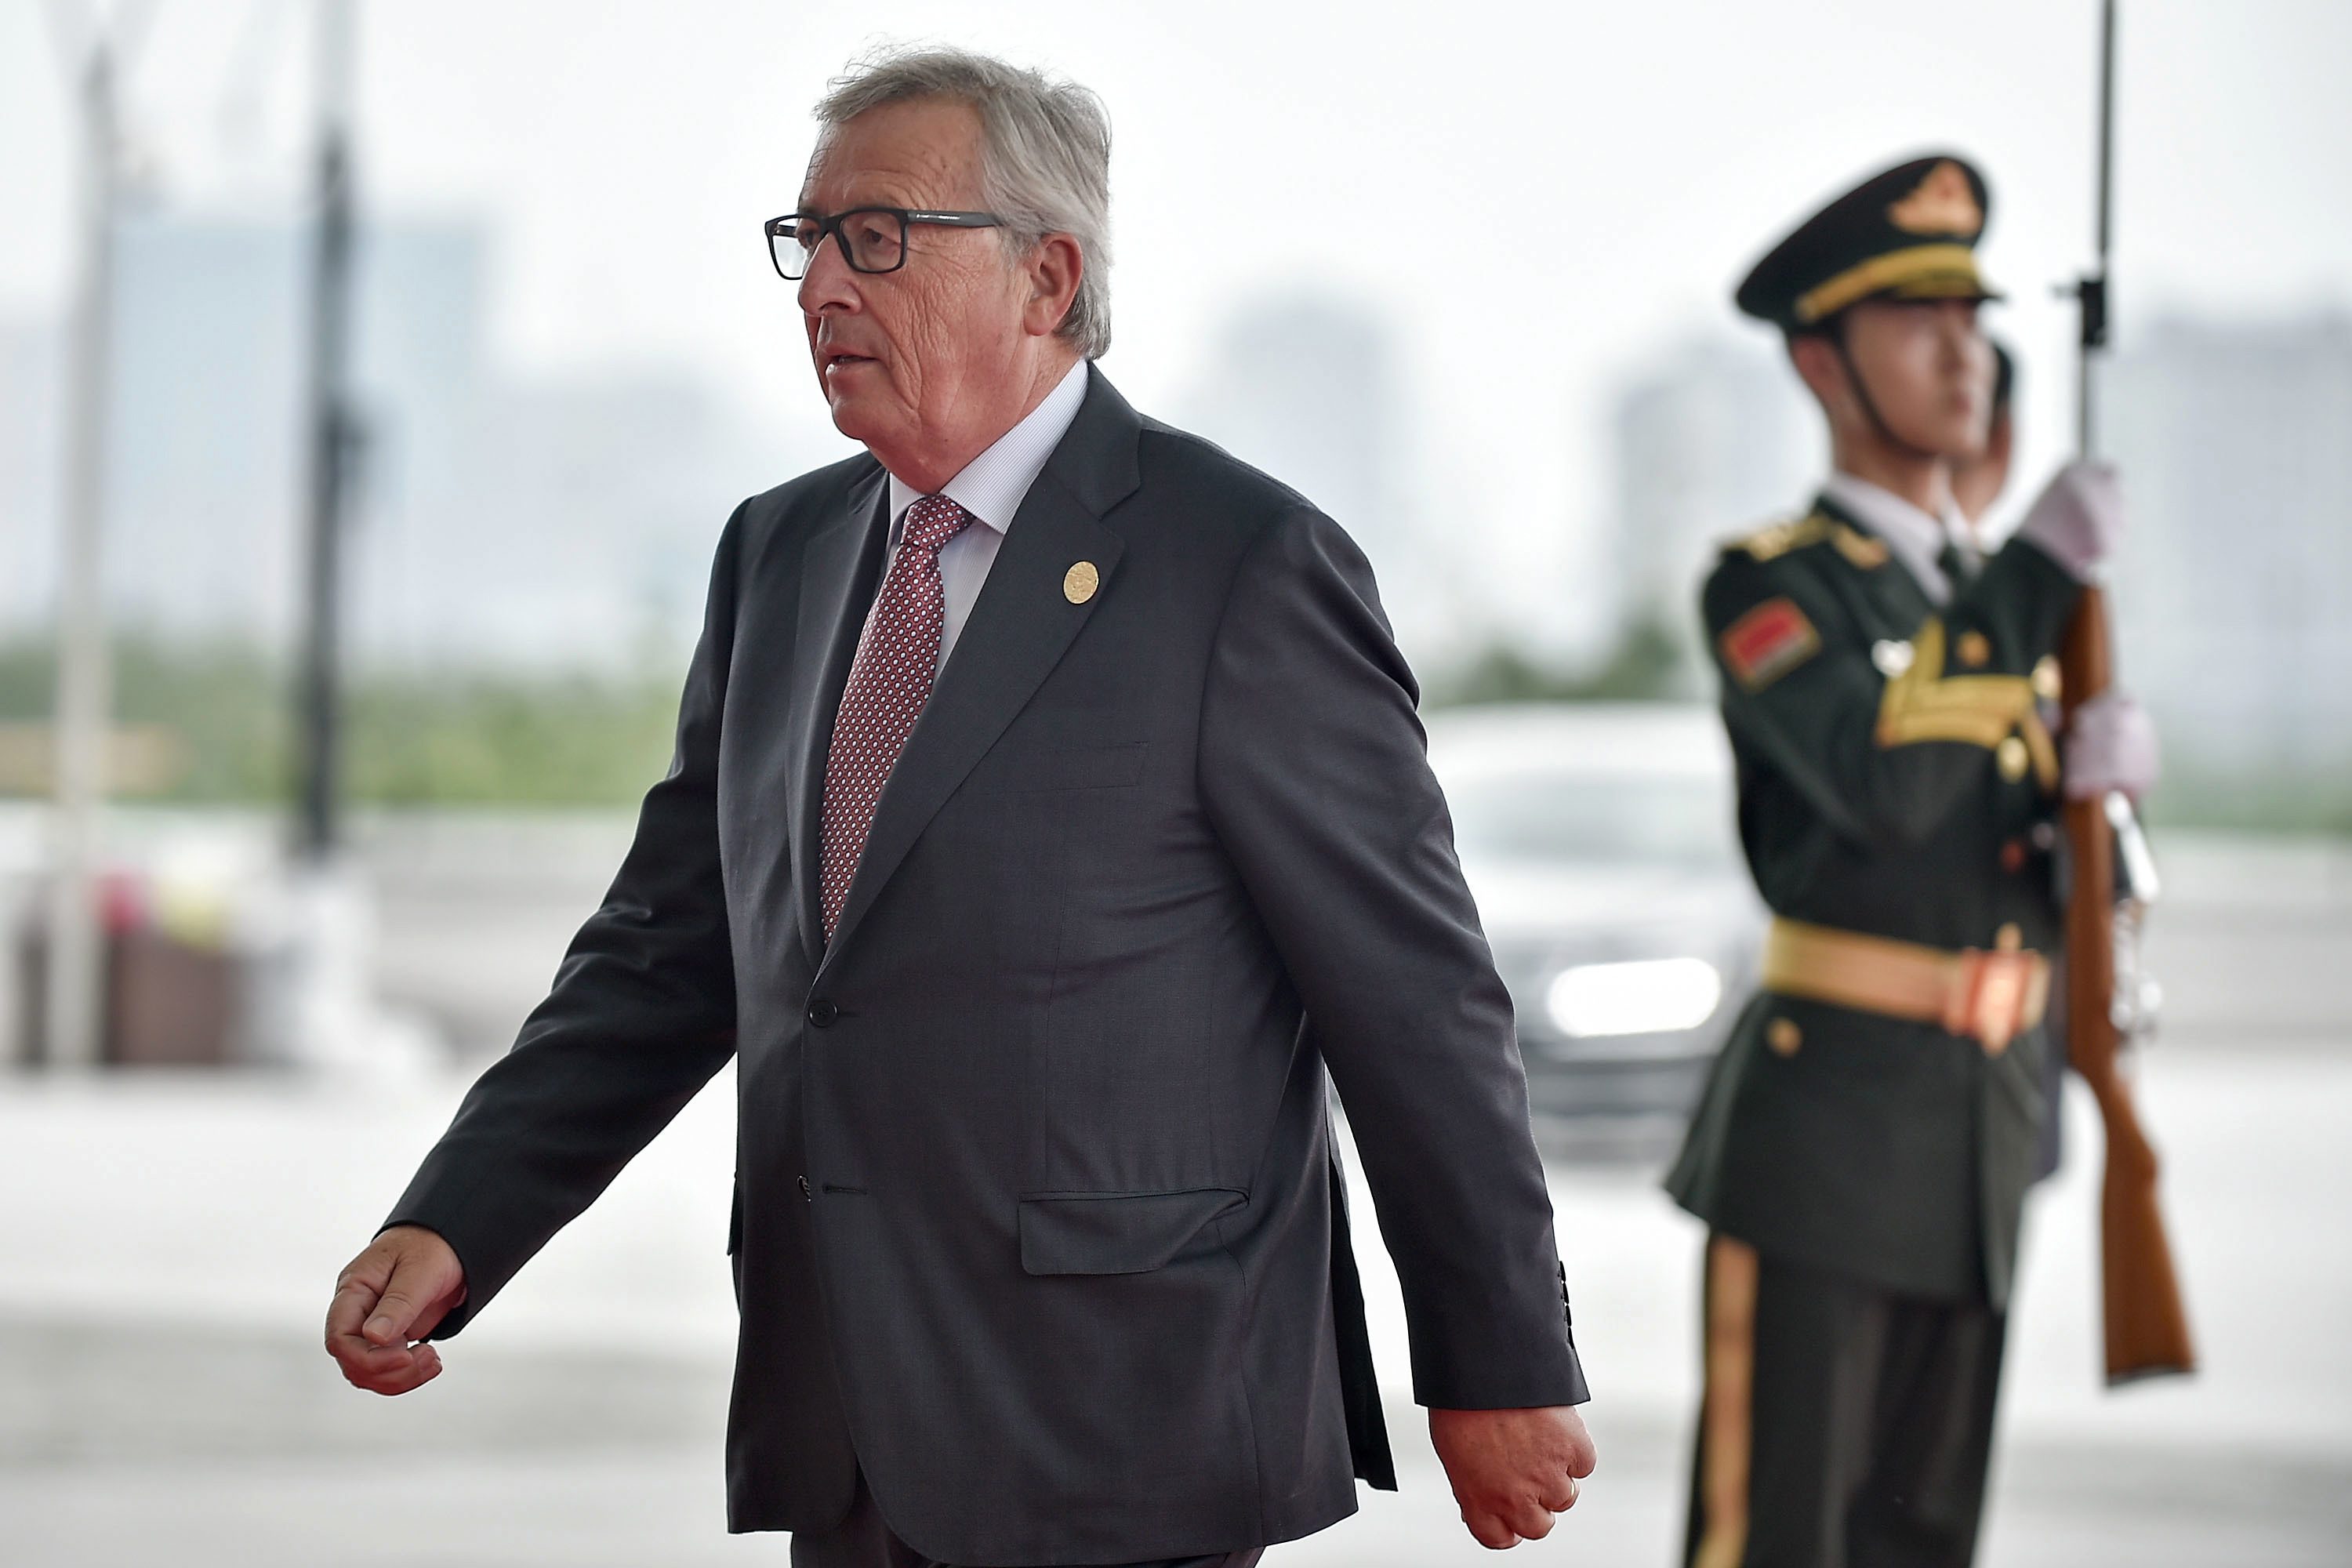 President Jean-Claude Juncker of the European Commission arrives at the Hangzhou Exhibition Center to participate in G20 Summit, Sunday, Sept. 4, 2016 in Hangzhou, China. (Etienne Oliveau/Pool Photo via AP)